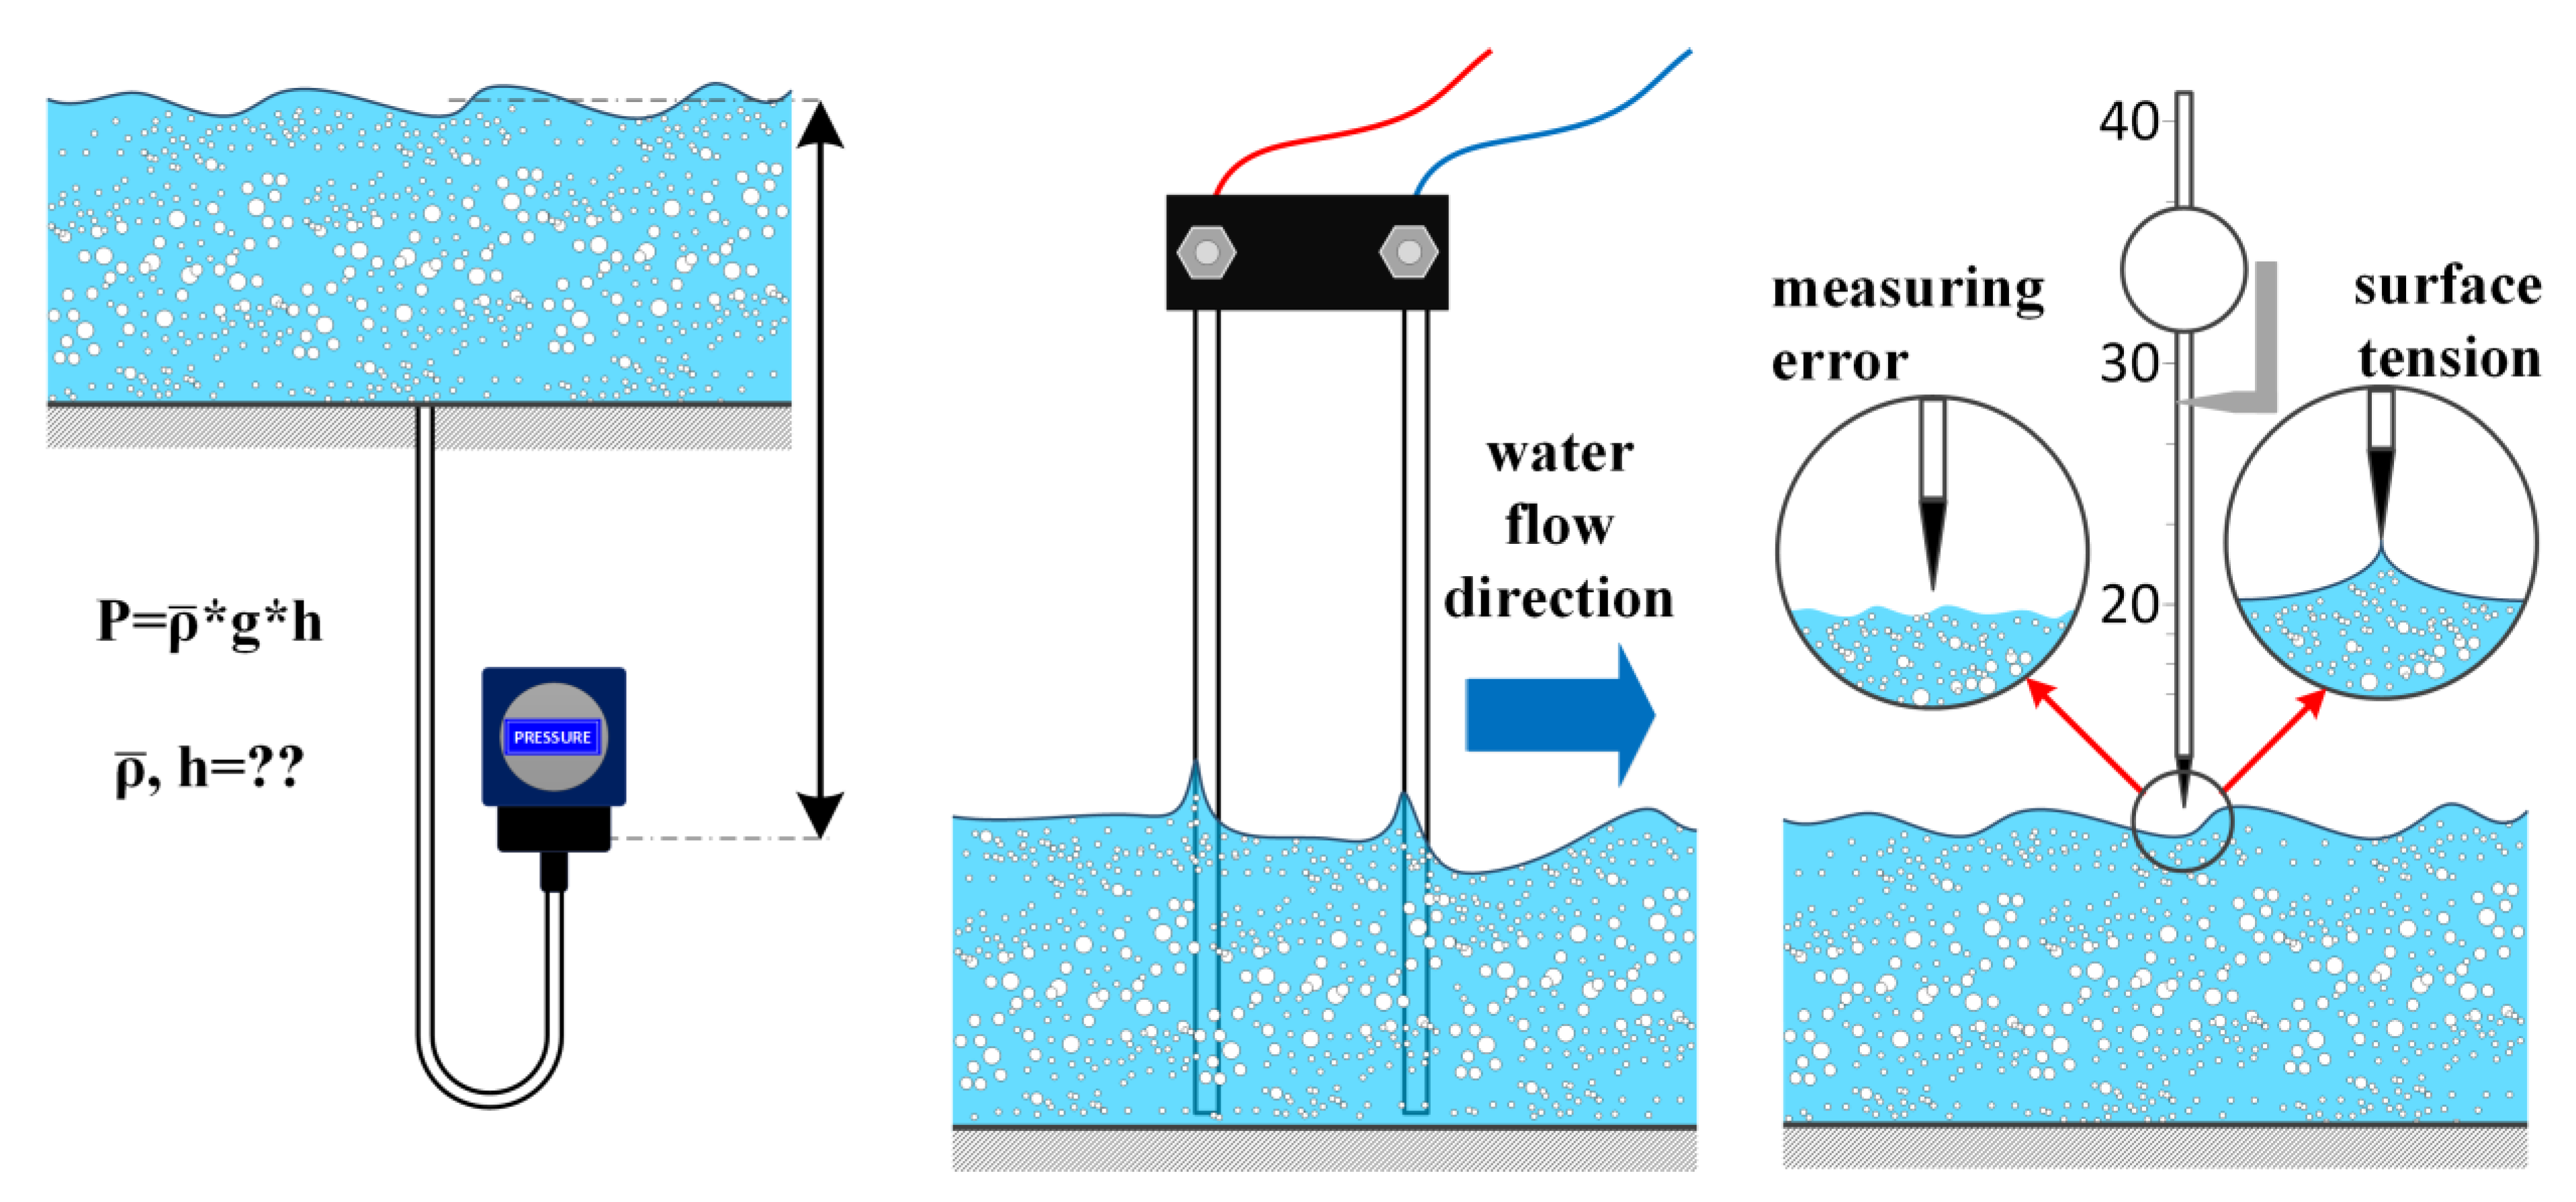 Sensors | Free Full-Text | A Review on Methods for Measurement of Free Water Surface